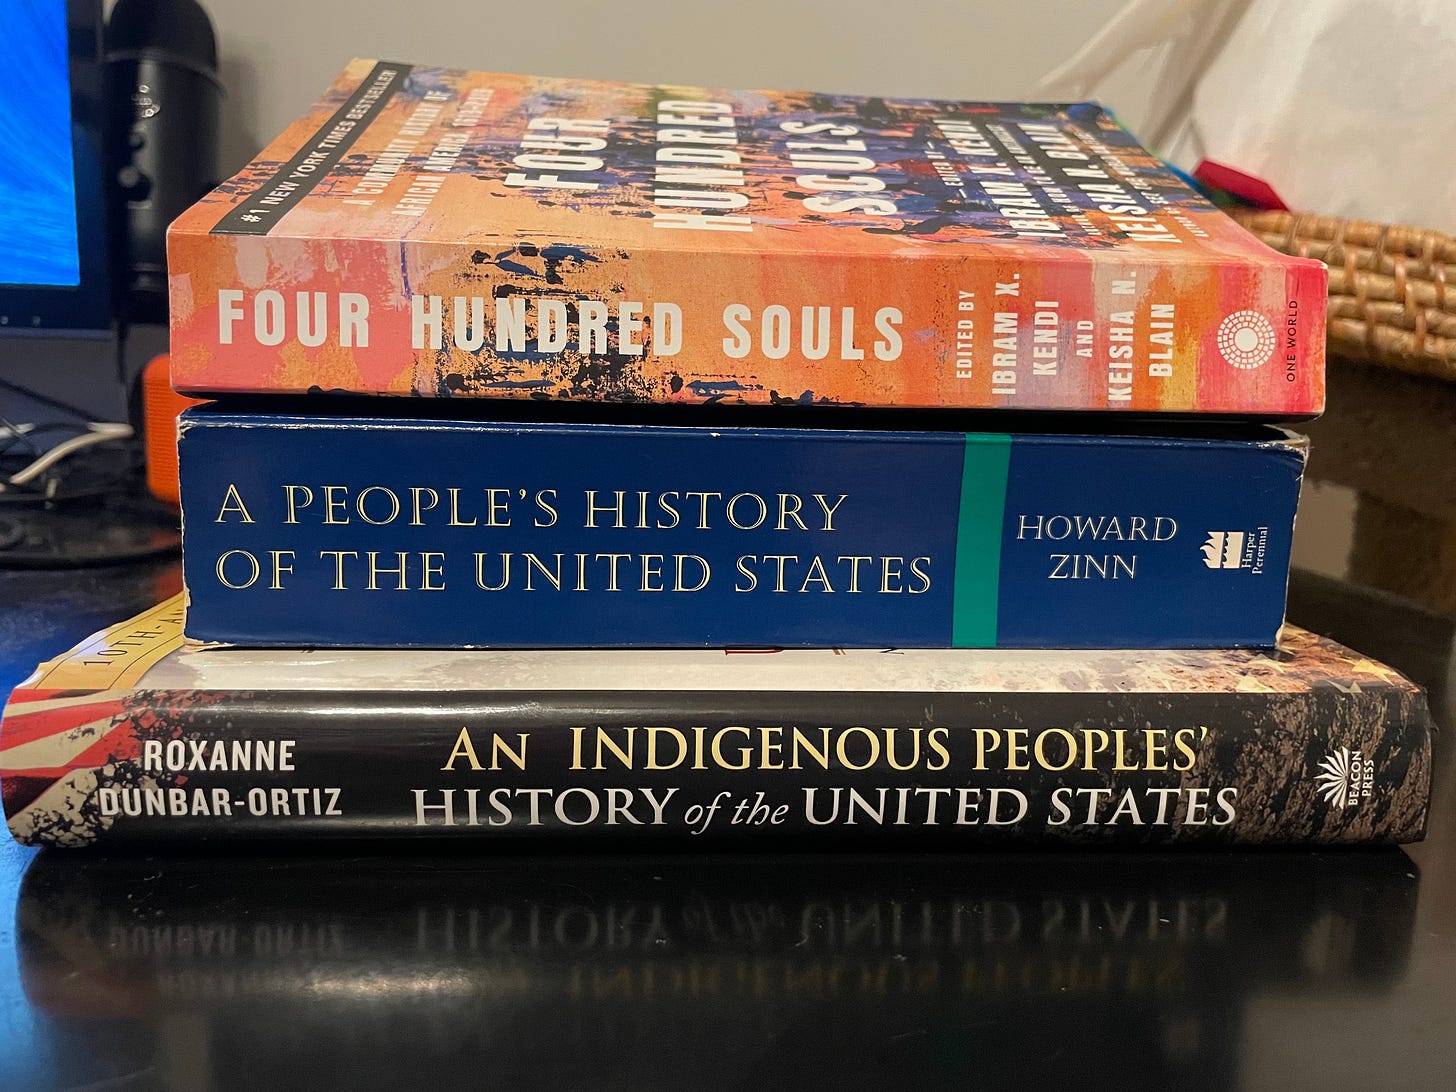 three books stacked: 'Four Hundred Souls' edited by Ibram X. Kendi and Keisha N. Blain, 'A People's History of the United States' by Howard Zinn, and 'An Indigenous People's History of the United States' by Roxanne Dunbar-Ortiz